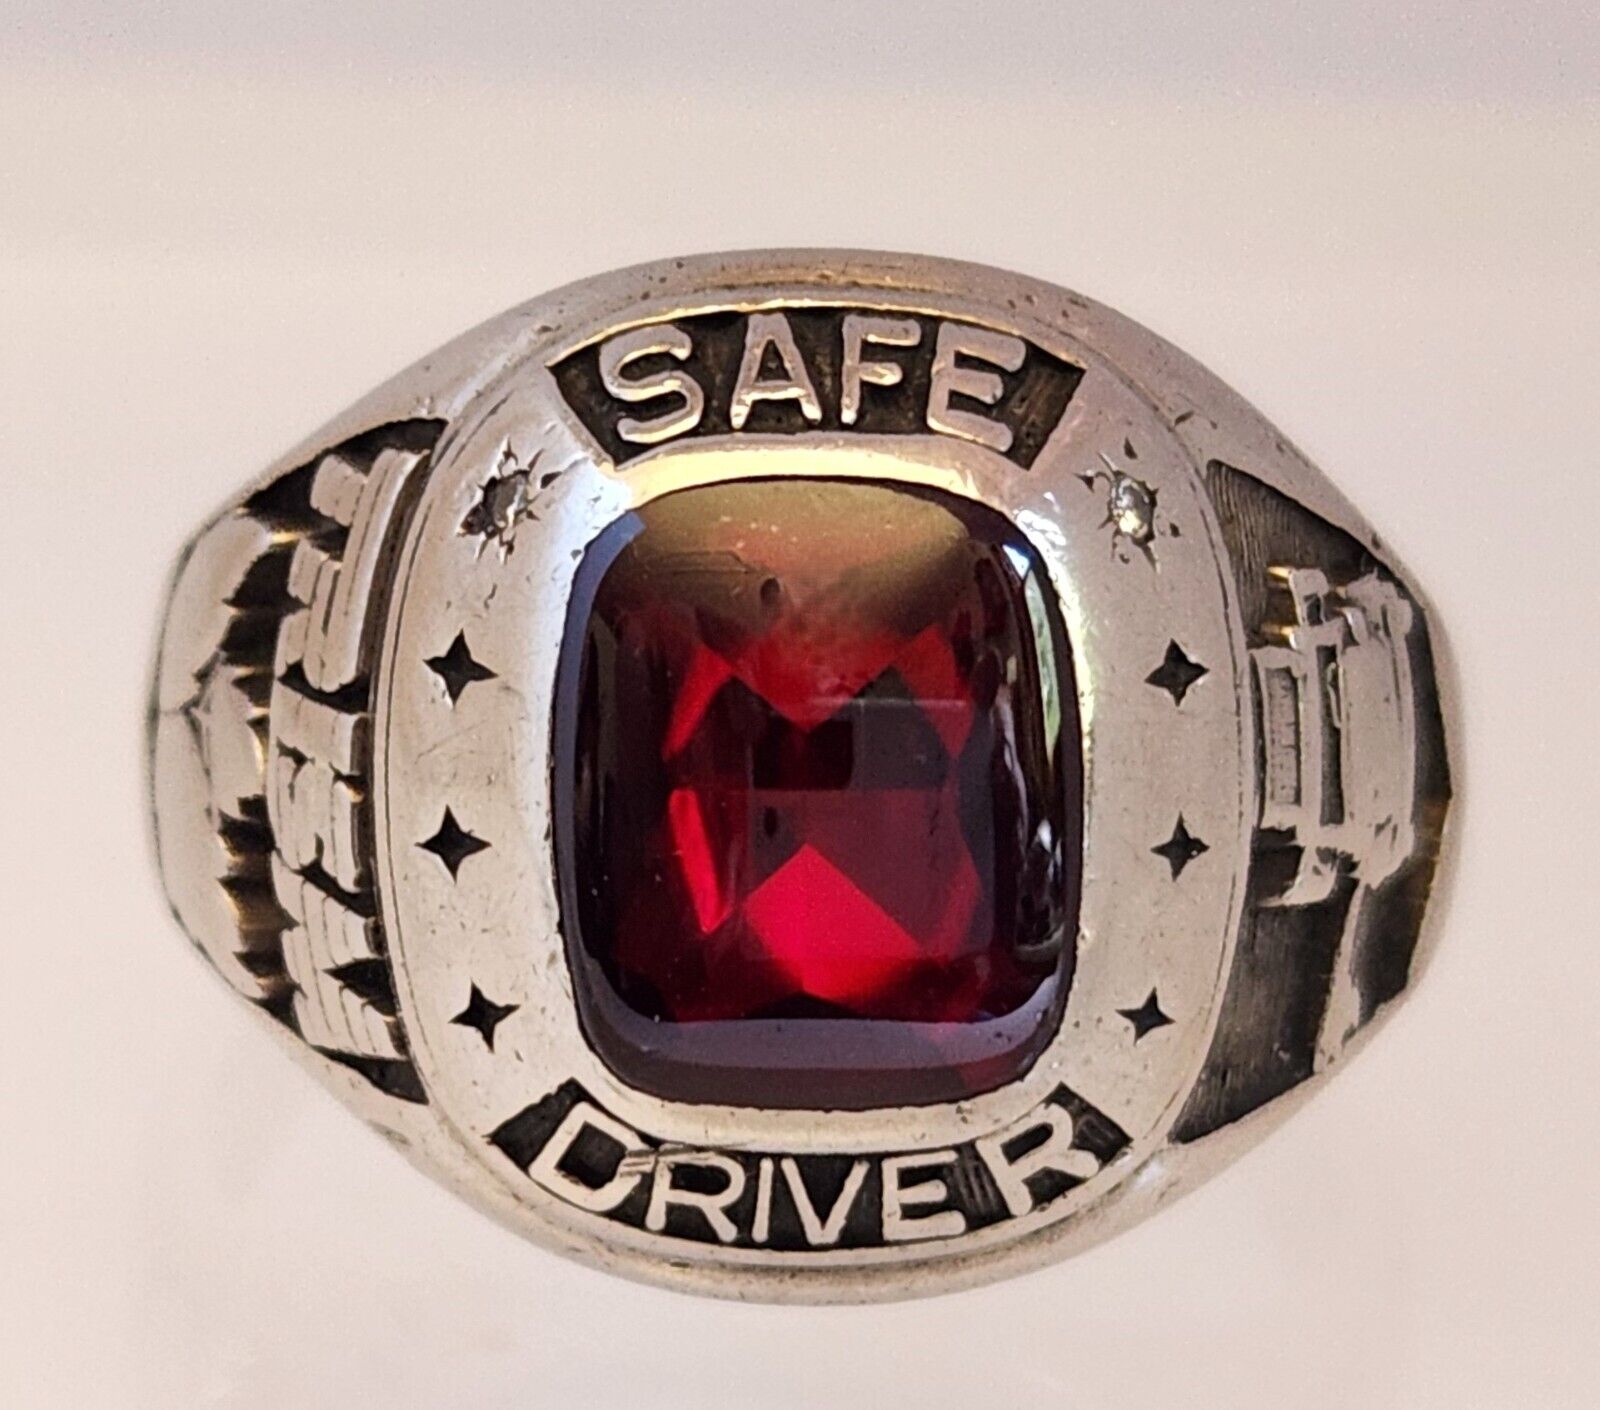 TRISM Trucking Co Safe Driver Award Size 14 Ring Precium Metal Diamond Accents